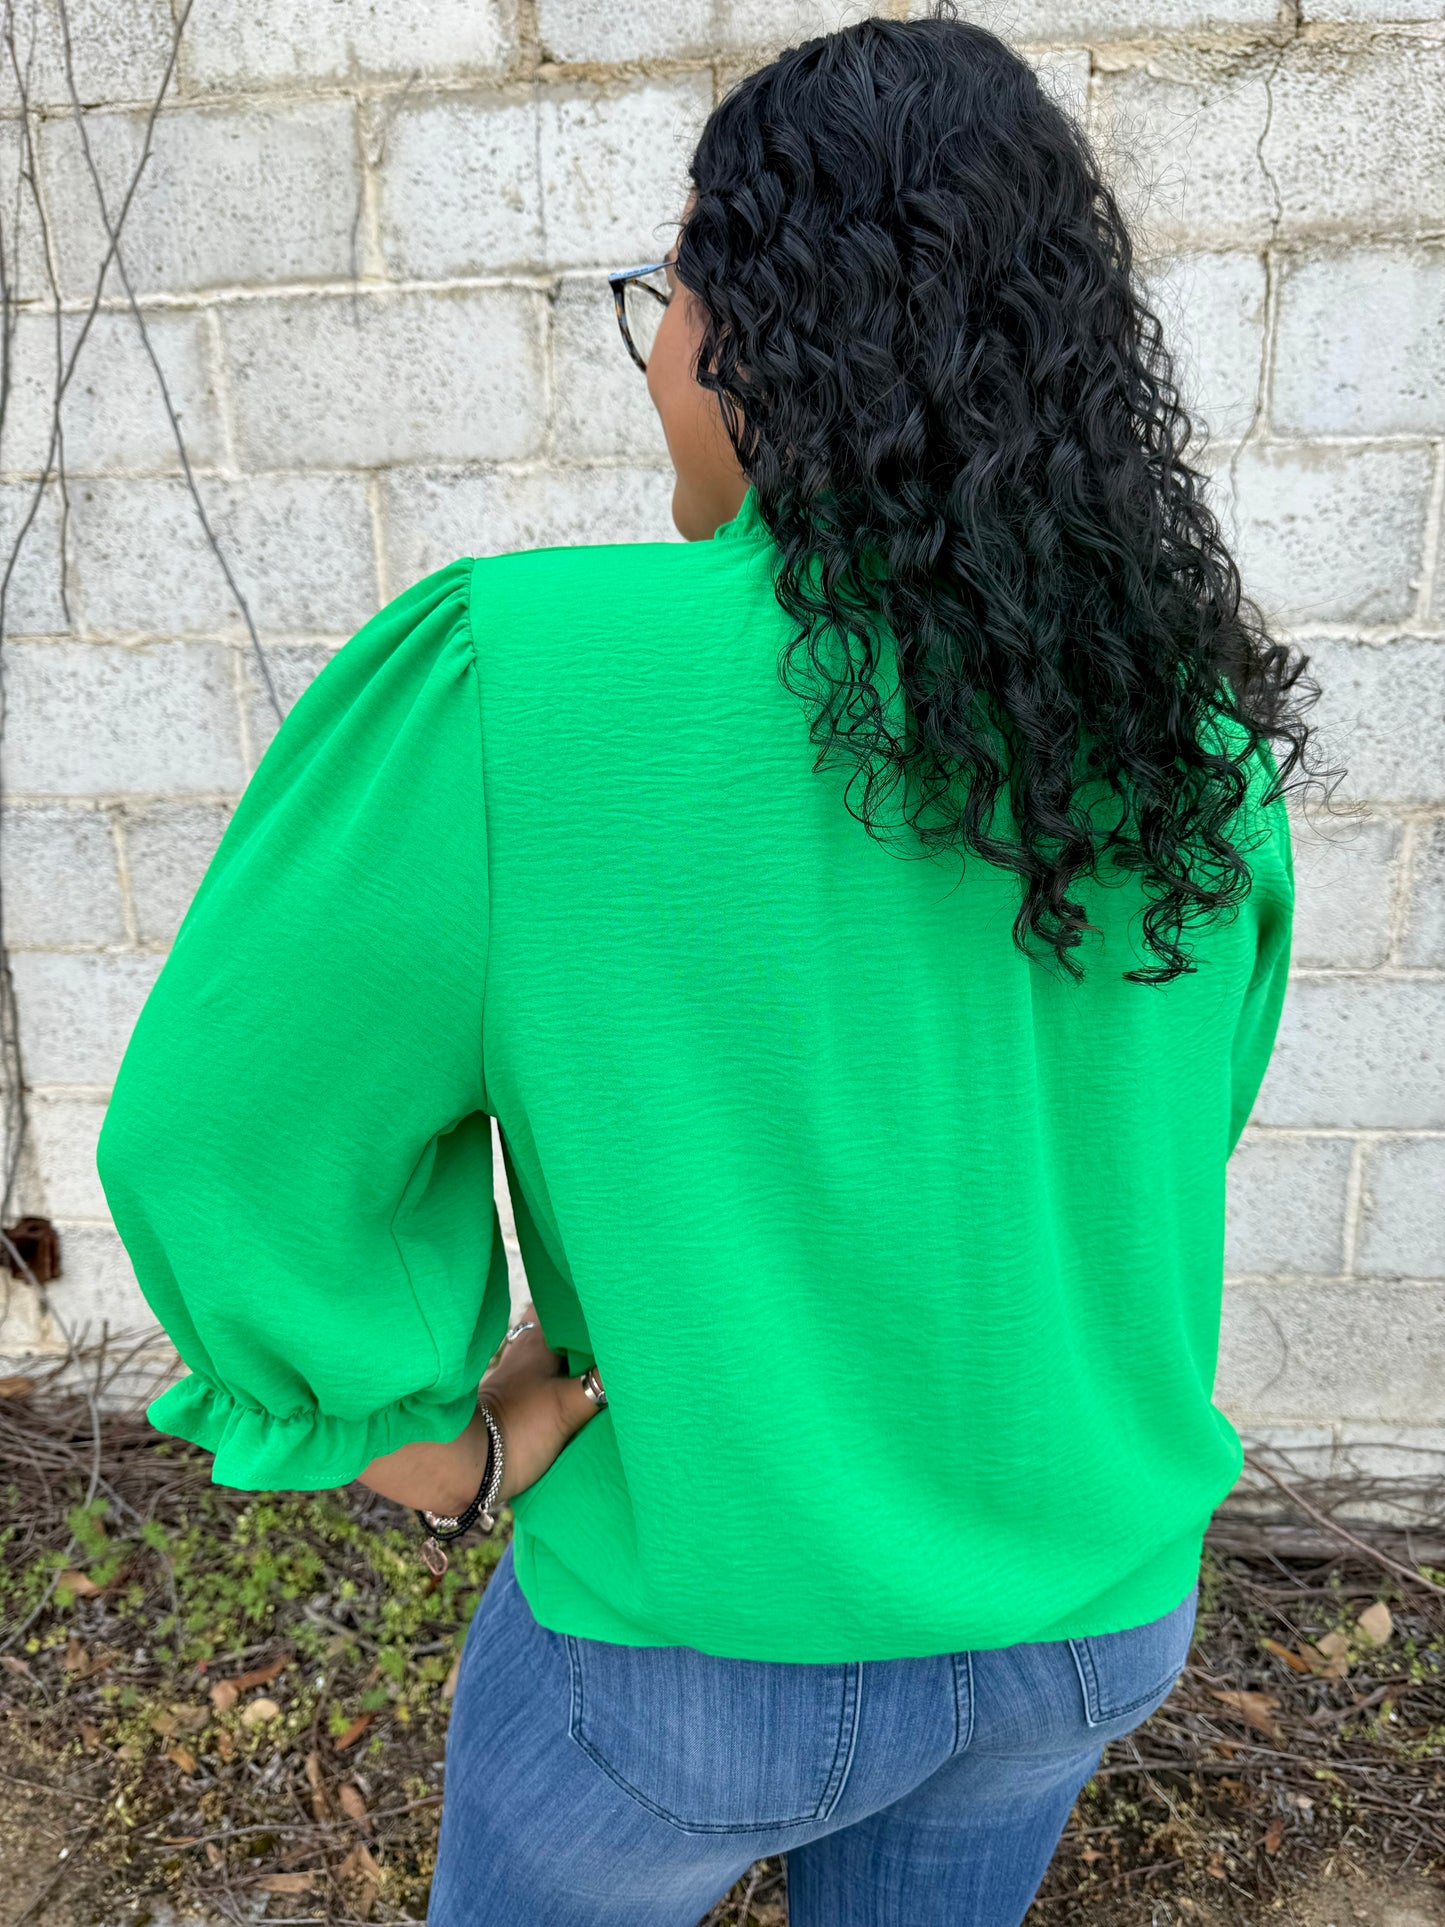 Back to Business Top, Kelly Green